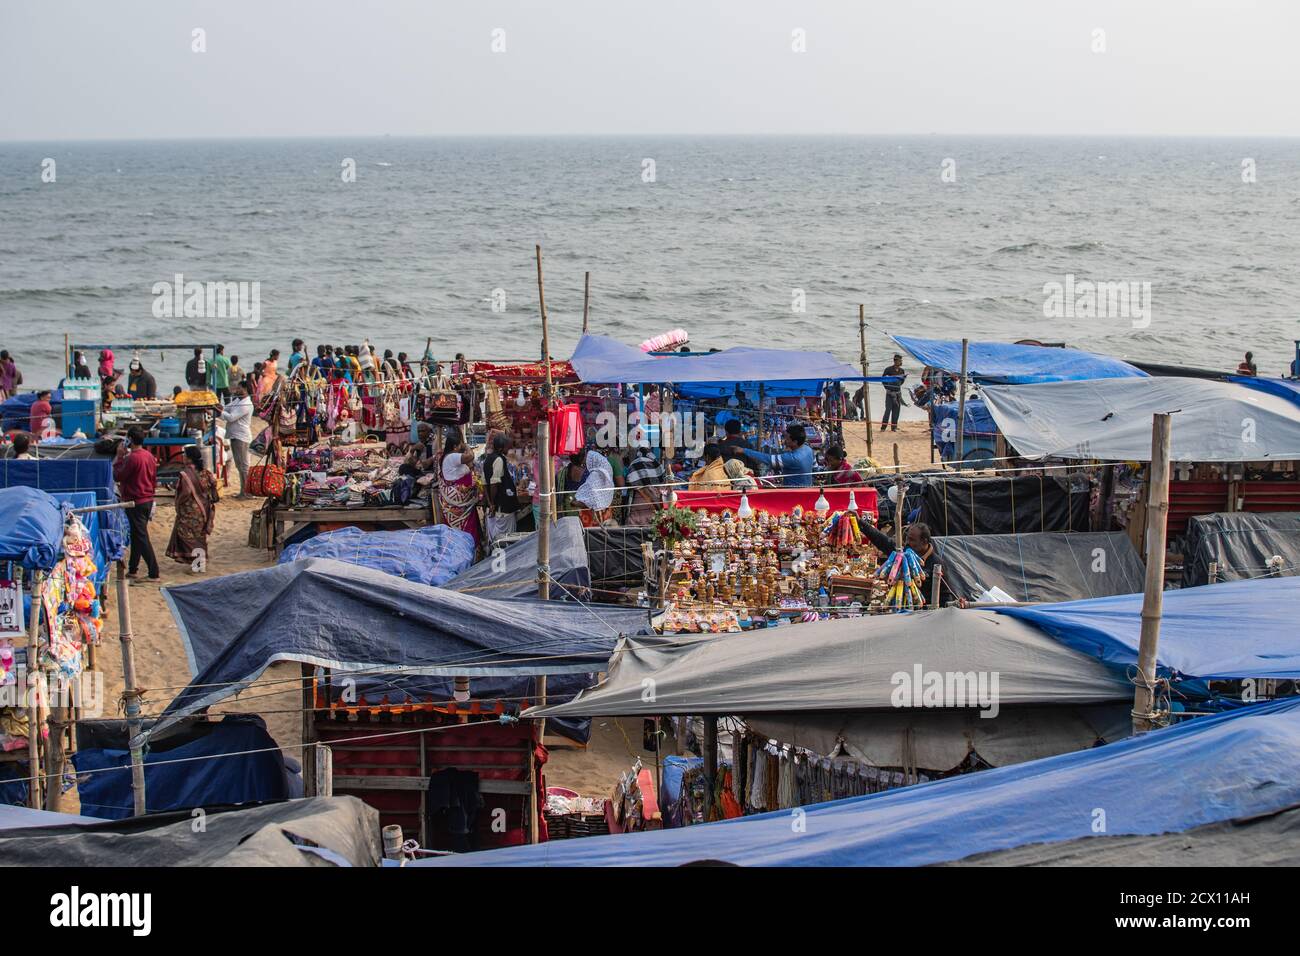 Puri, India - February 3, 2020: Unidentified people attends a market at Puri Beach on February 3, 2020 in Puri, India Stock Photo